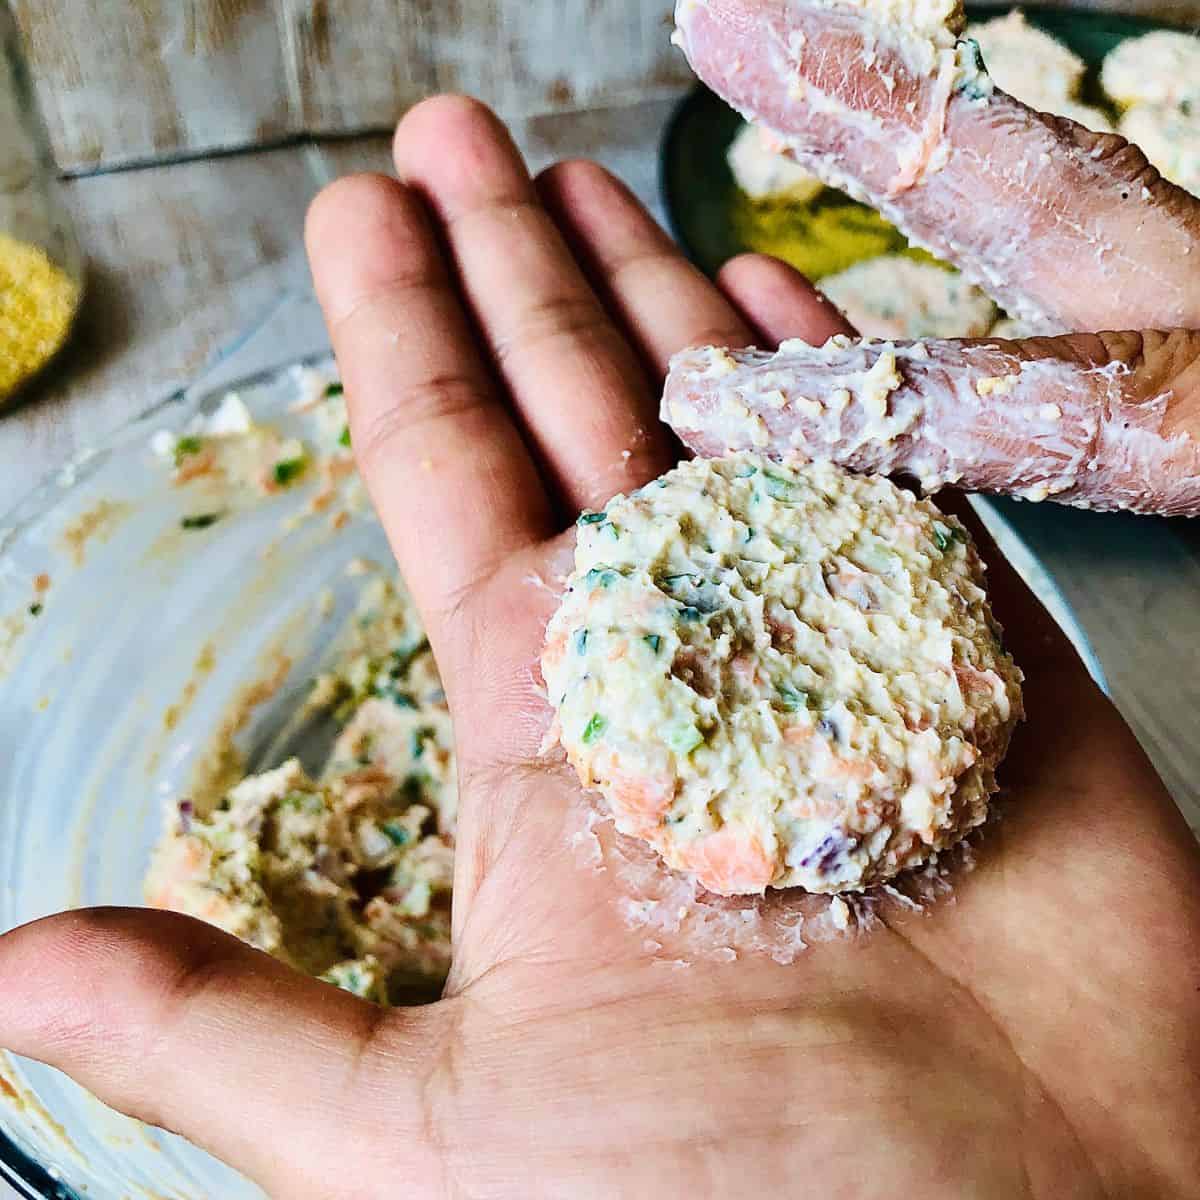 Dahi ke kabab mixture formed into a small patty in the palm of a hand.